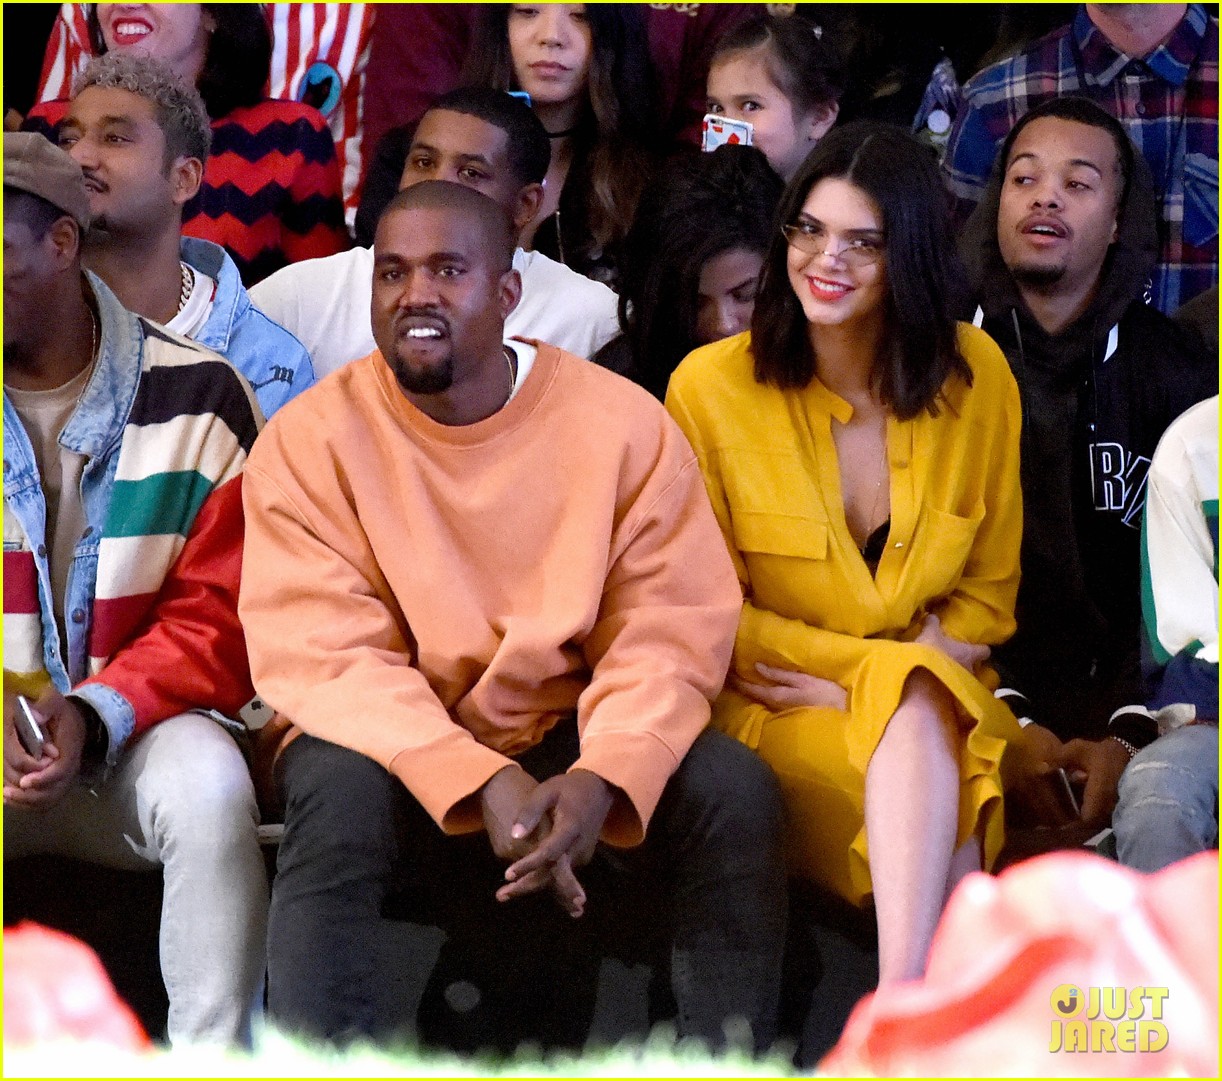 cole dylan sprouse kanye west kendall jenner tyler creator la show 06